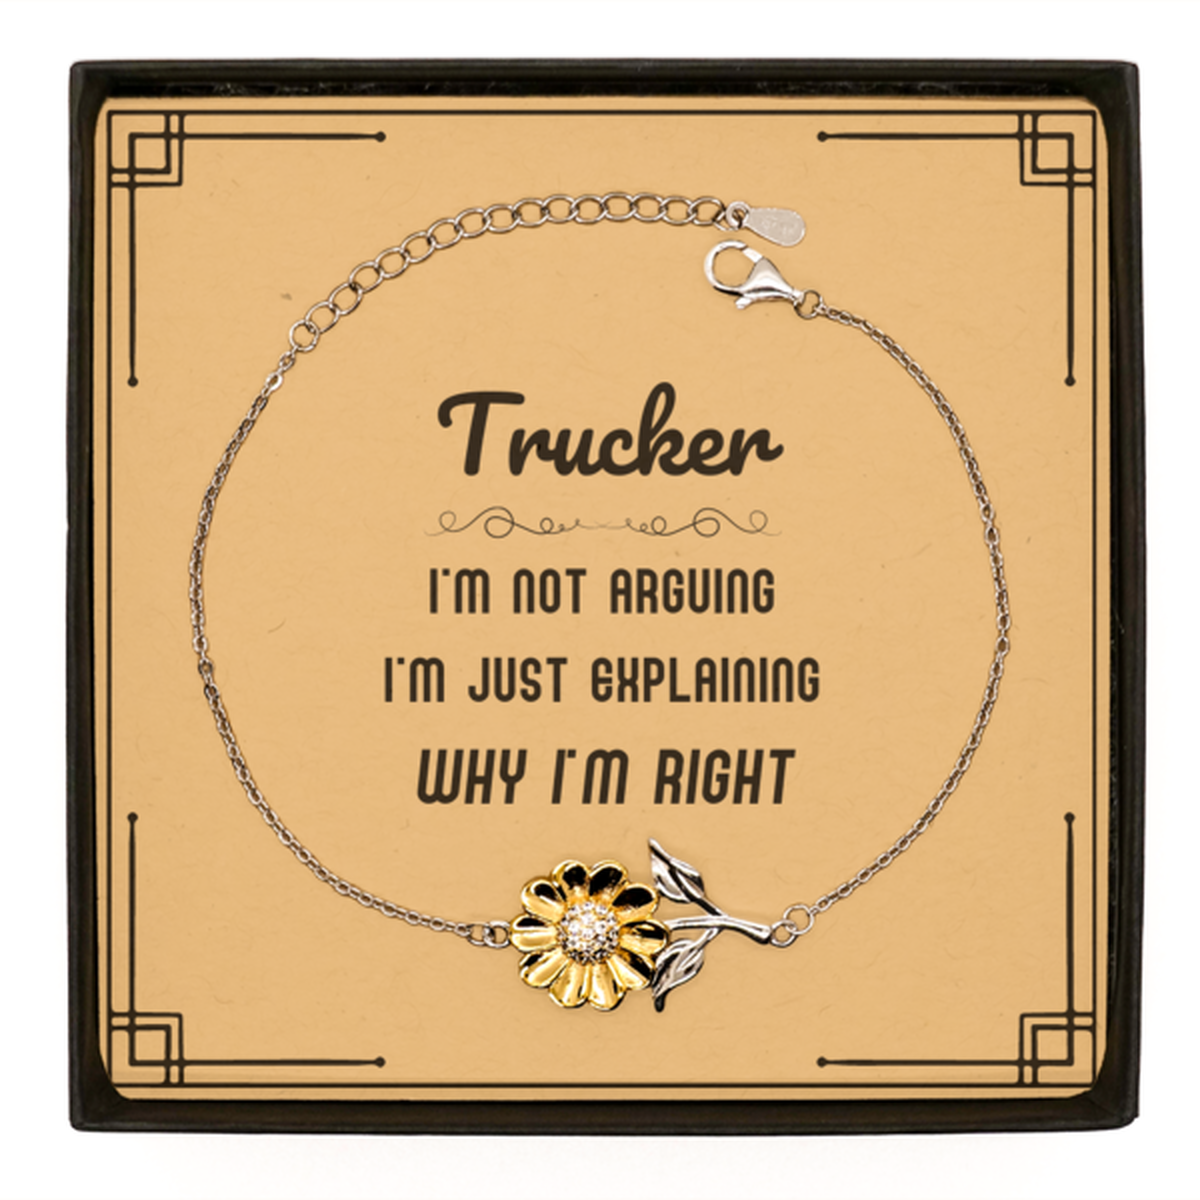 Trucker I'm not Arguing. I'm Just Explaining Why I'm RIGHT Sunflower Bracelet, Funny Saying Quote Trucker Gifts For Trucker Message Card Graduation Birthday Christmas Gifts for Men Women Coworker